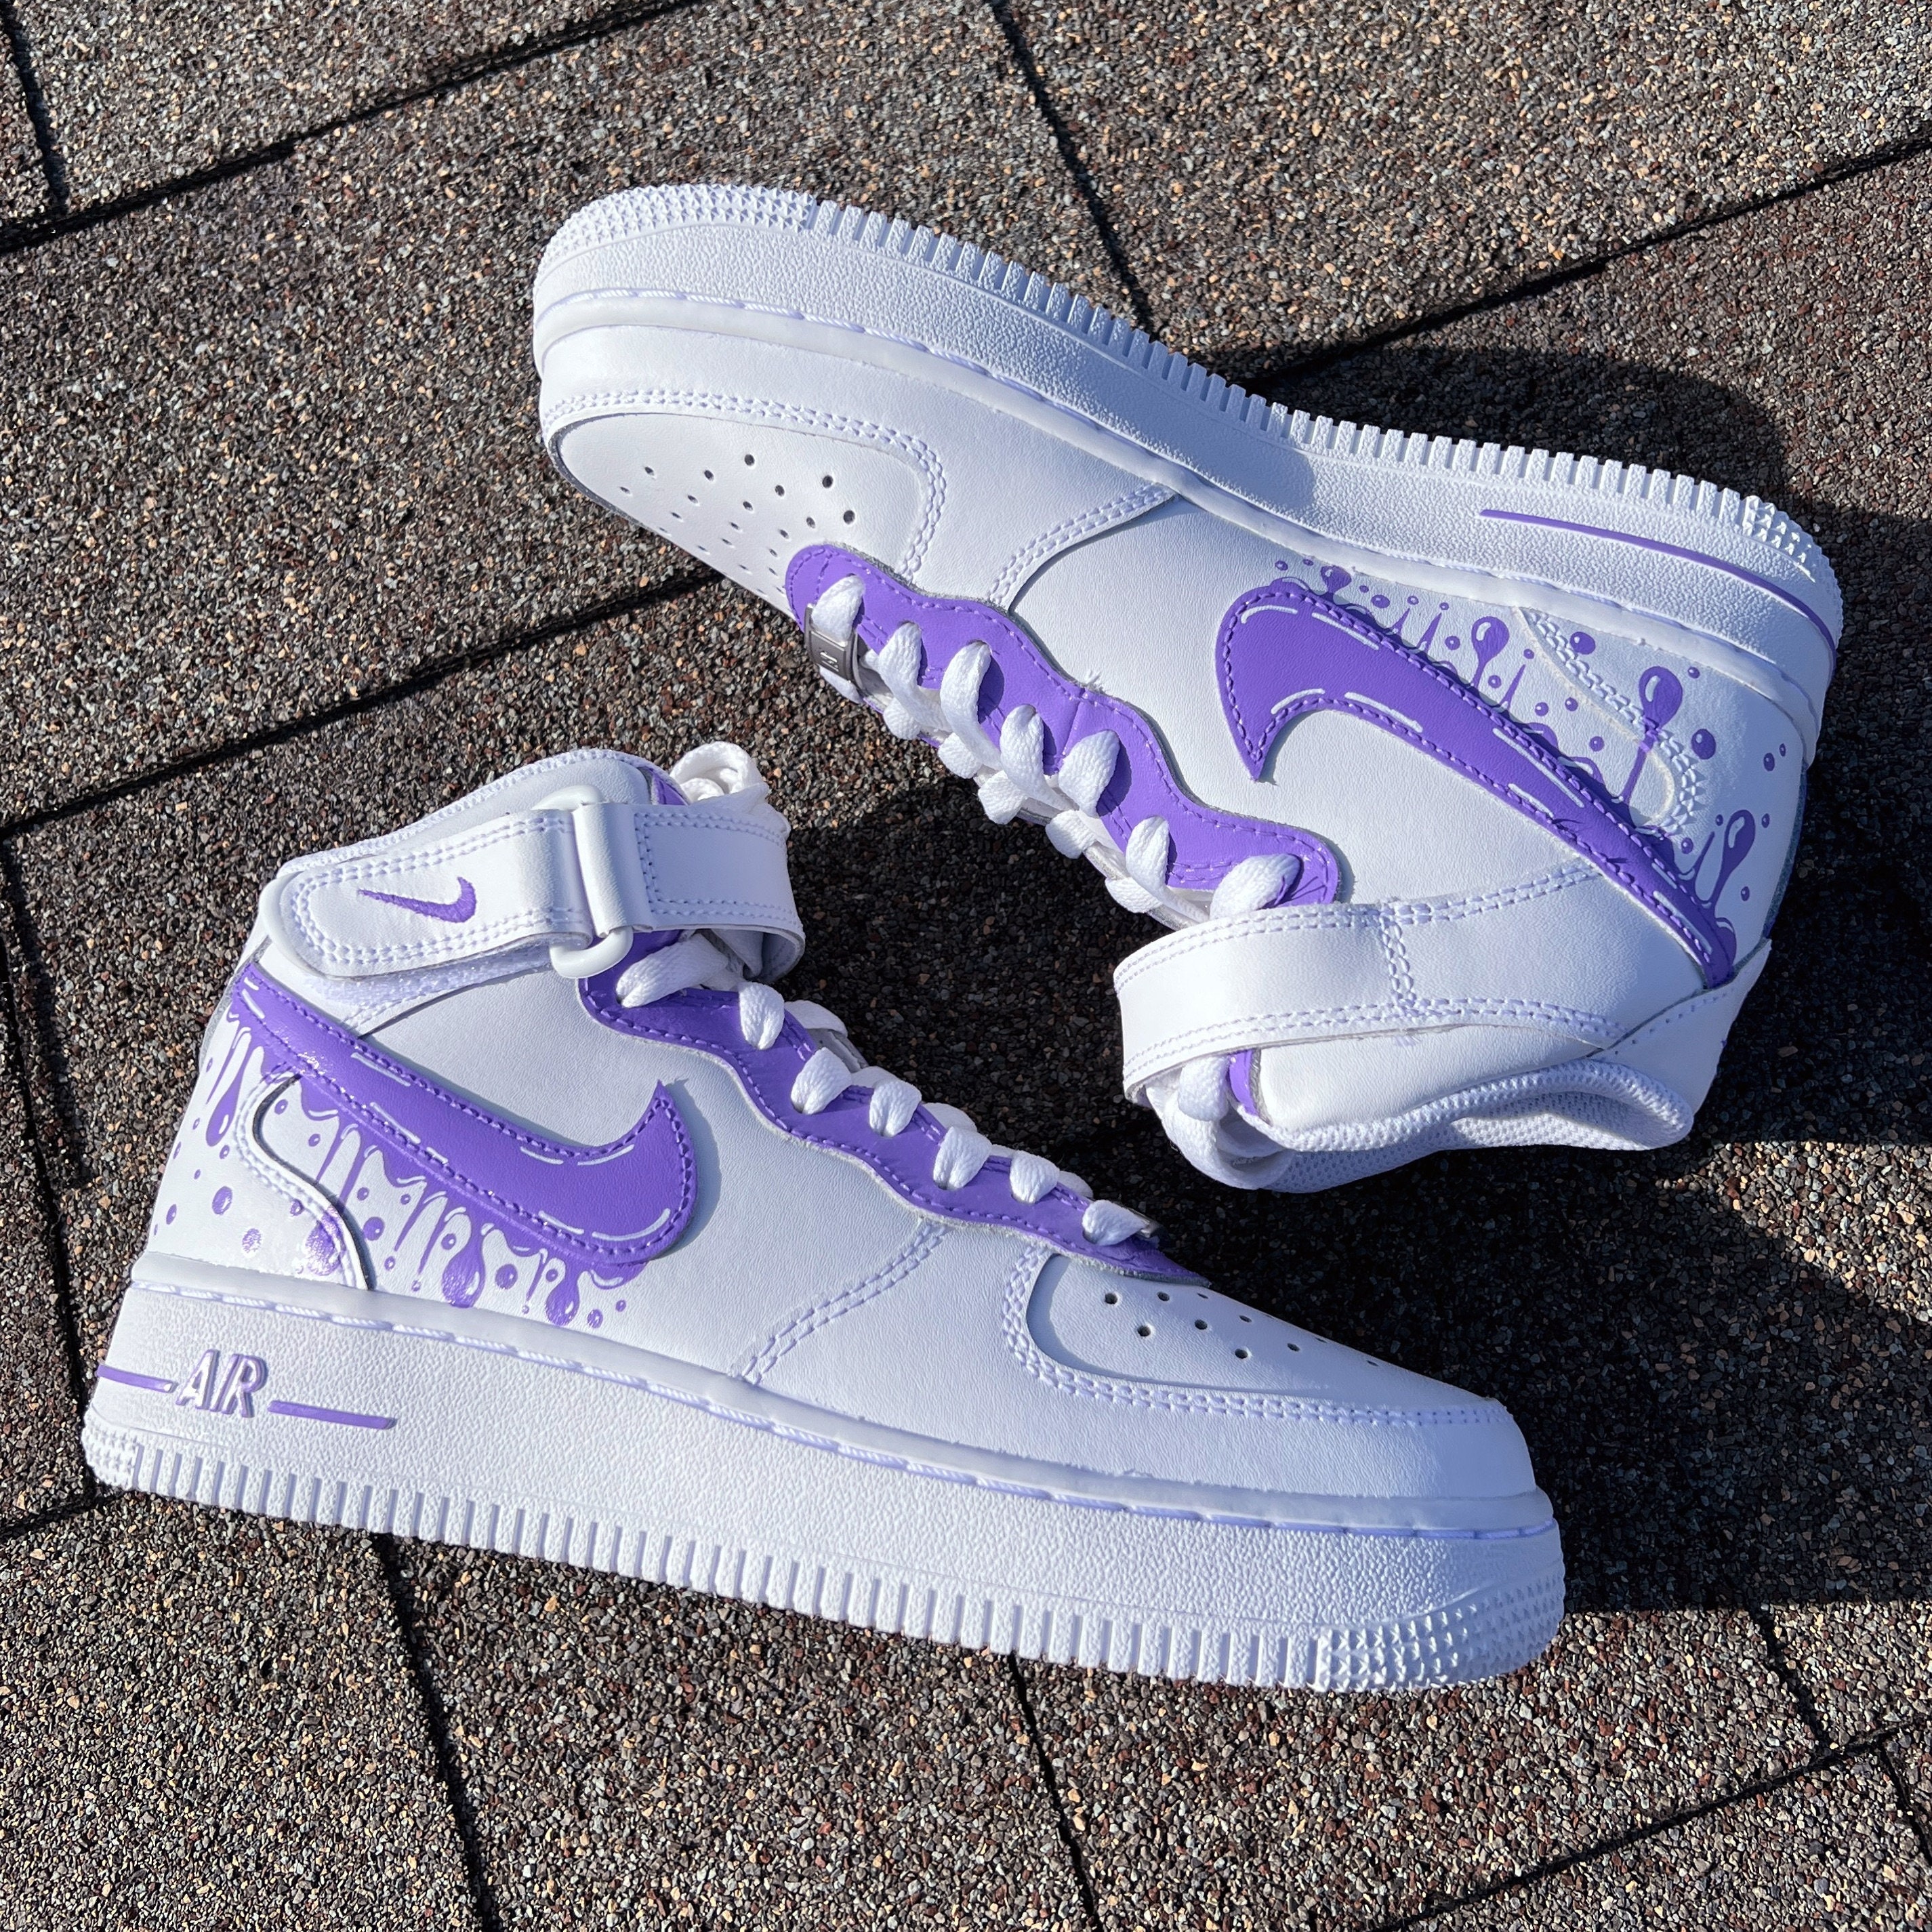 Custom Nike Air Force 1 High/mid/low Drippy Shoes Any Colors 